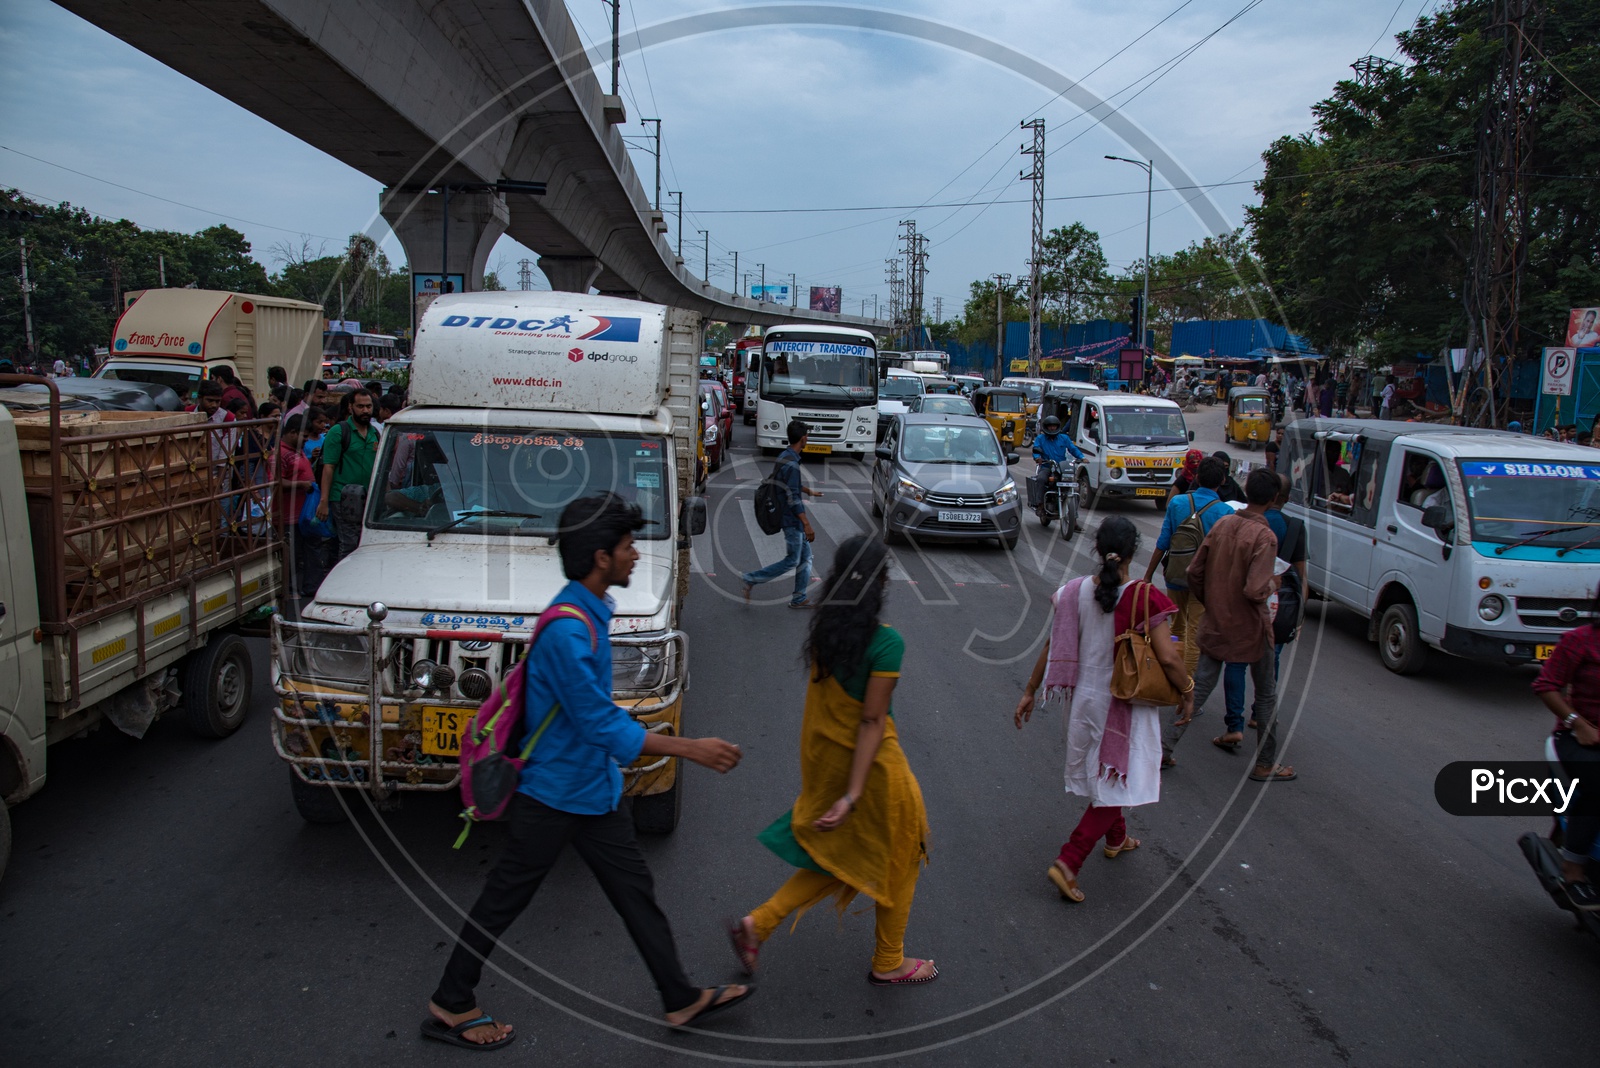 Pedestrains crossing a signal in Hyderabad irregularly